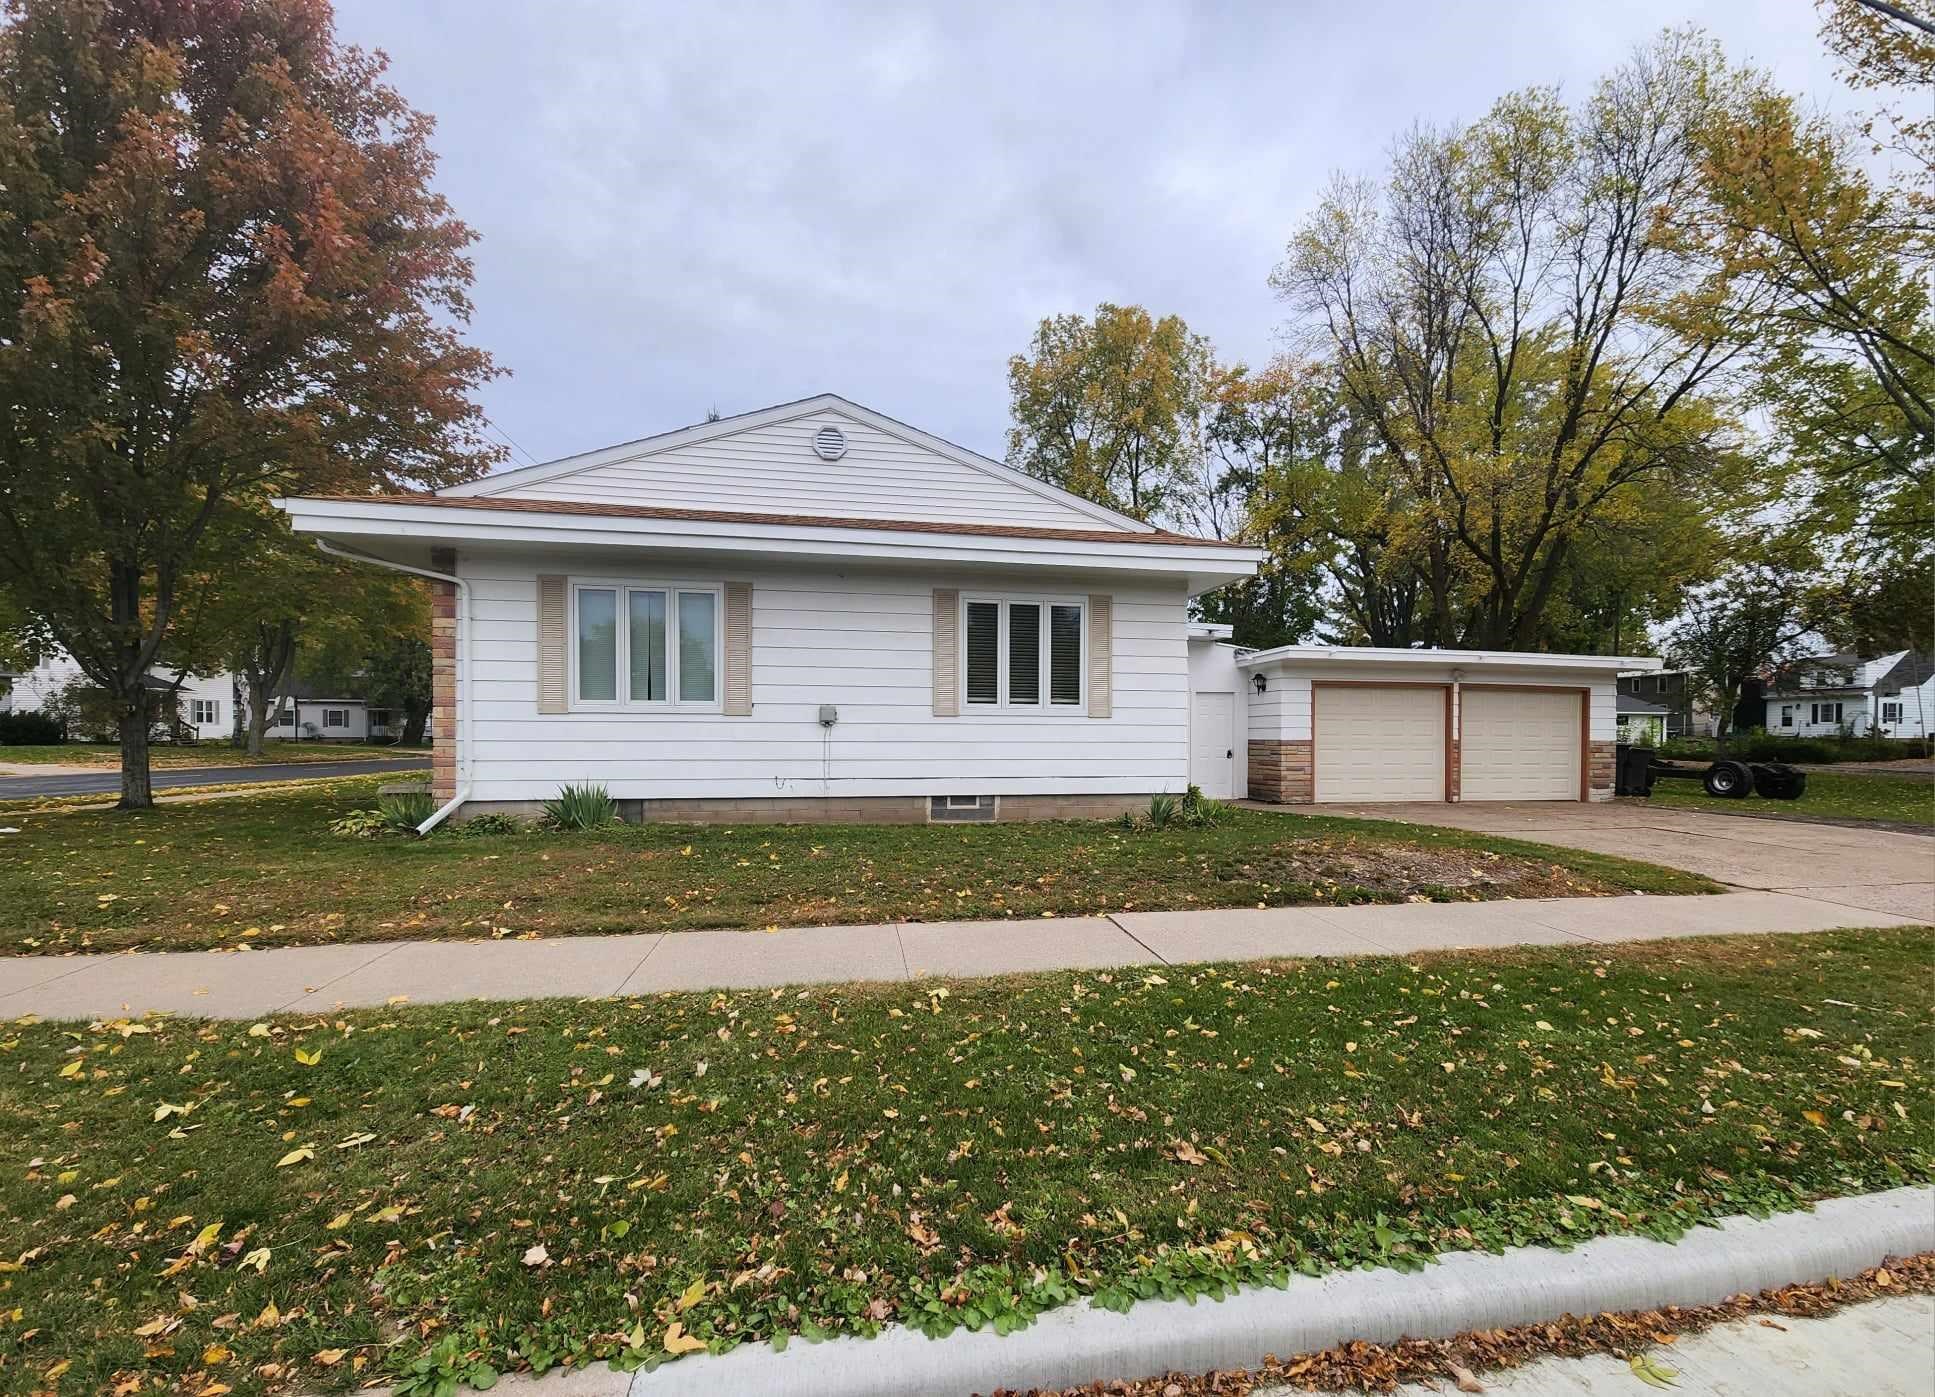 713 S PEACH AVENUE, Marshfield, Wisconsin 54449, 2 Bedrooms Bedrooms, ,1 BathroomBathrooms,Residential,For Sale,713 S PEACH AVENUE,22401156